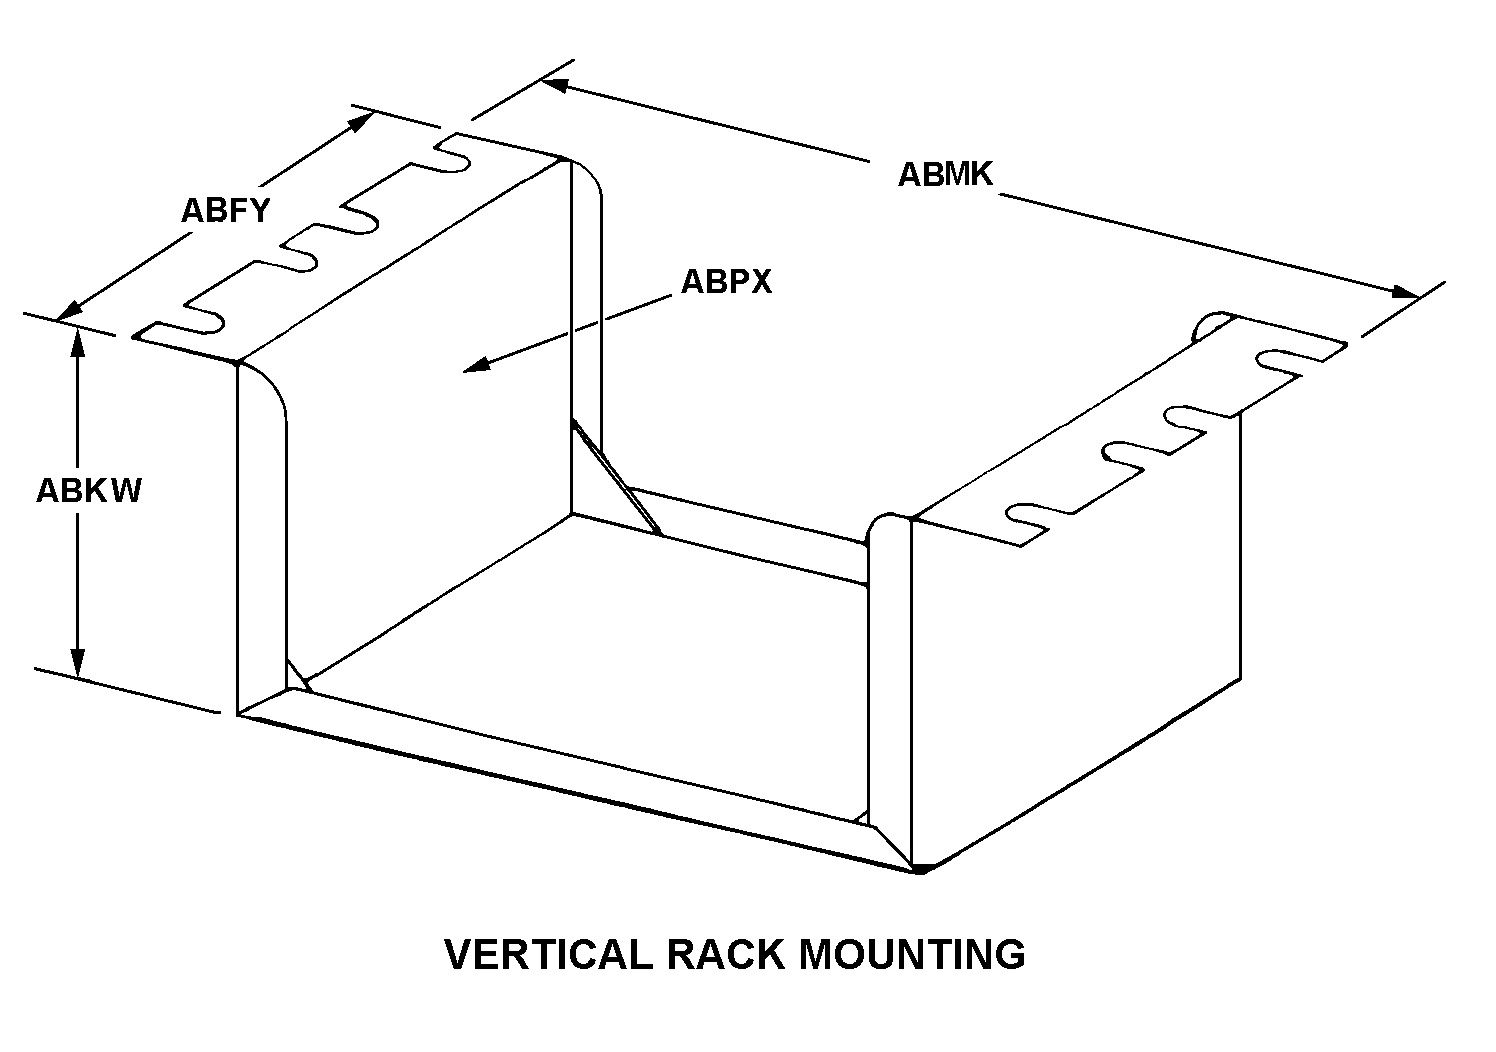 VERTICAL RACK MOUNTING style nsn 5975-01-389-4417